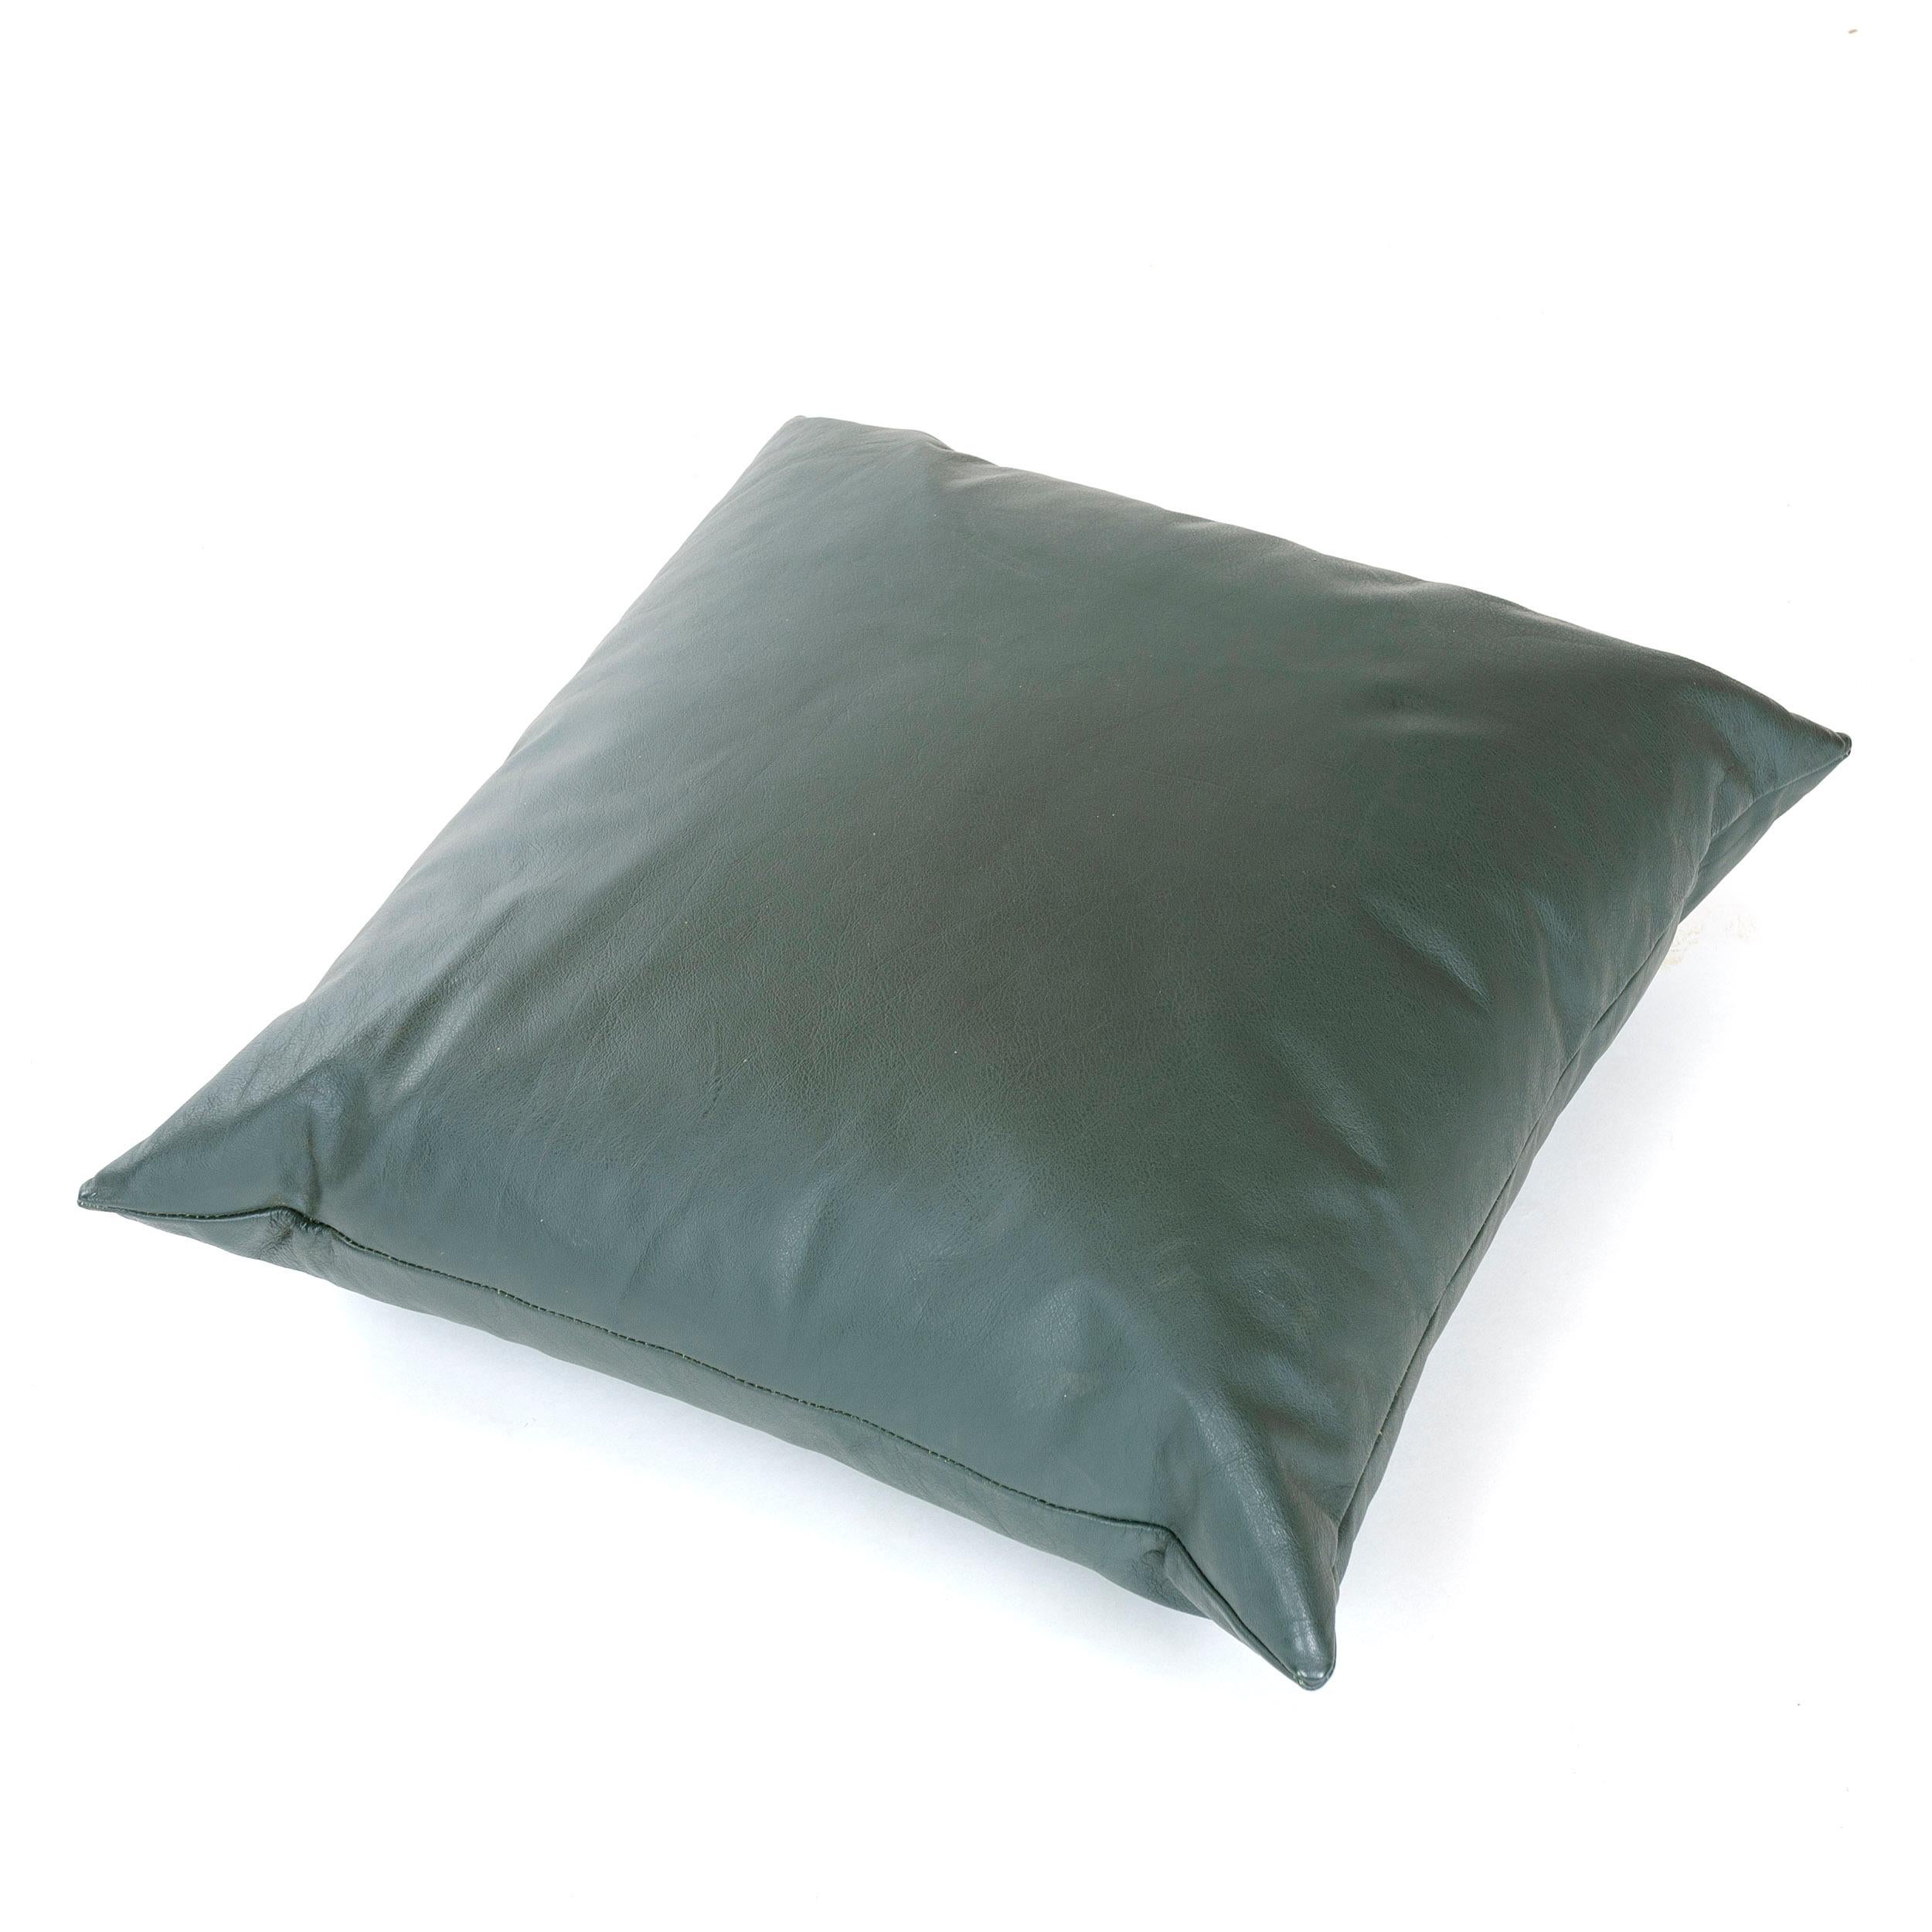 American 1980s Leather Pillow by Joe D'Urso for Knoll For Sale